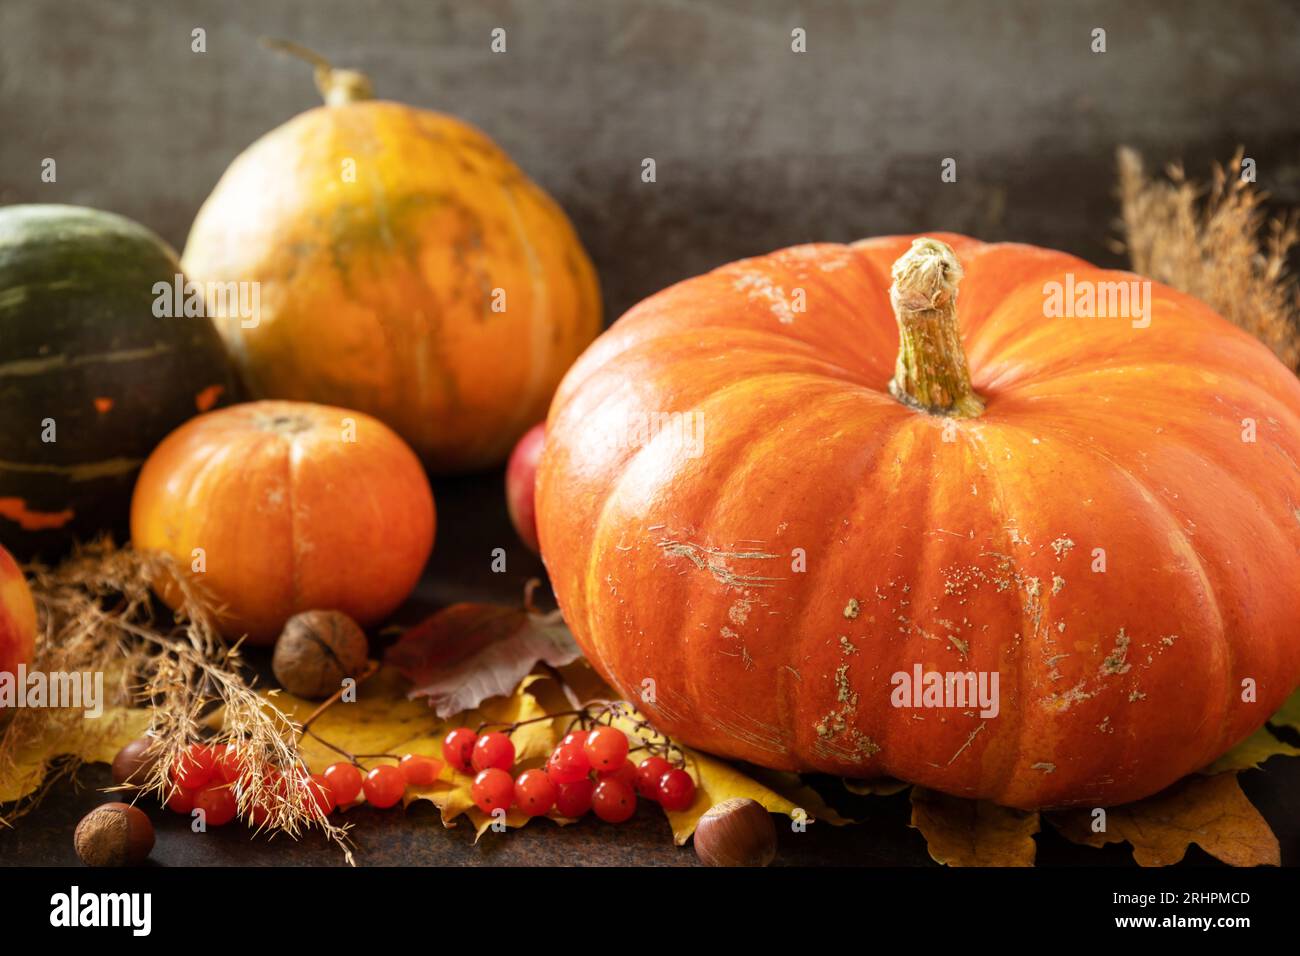 Autumn Day Thanksgiving or Halloween background. Festive autumn decor from ripe pumpkins, berries and leaves on a wooden background. Stock Photo